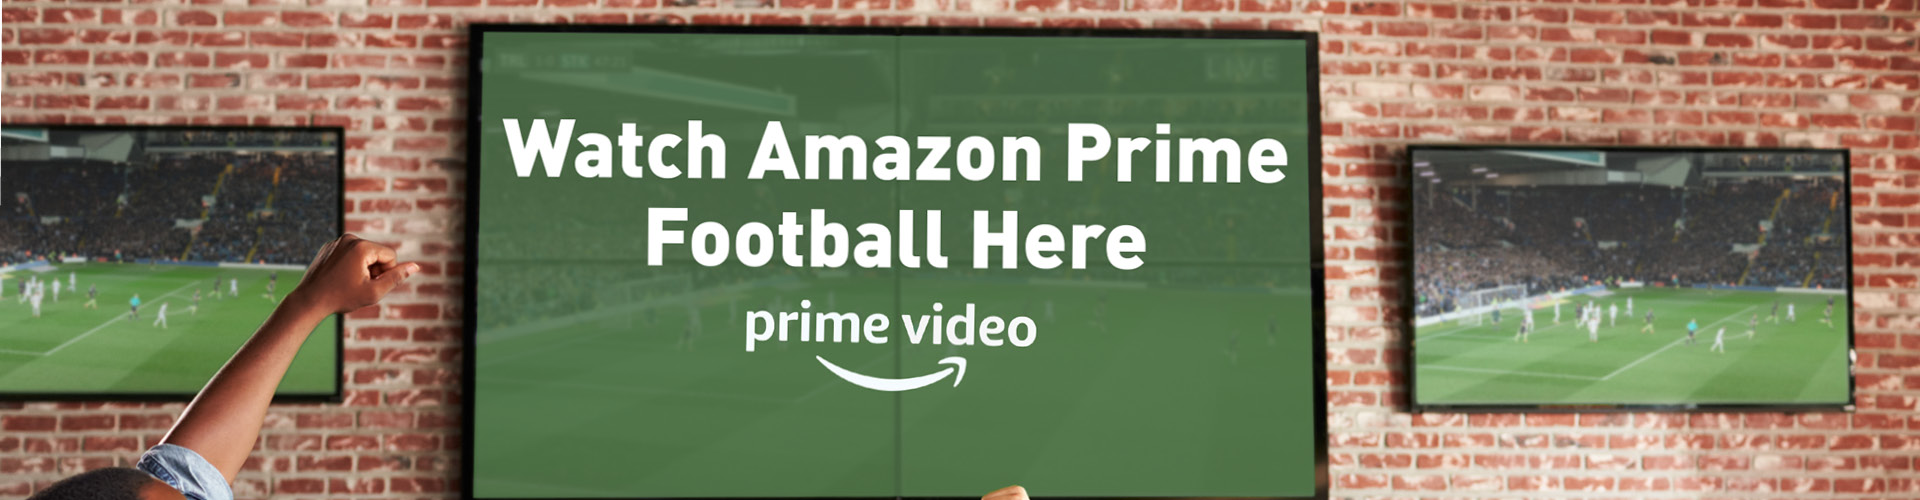 Watch Amazon Prime football at The Black Hat in Ilkley